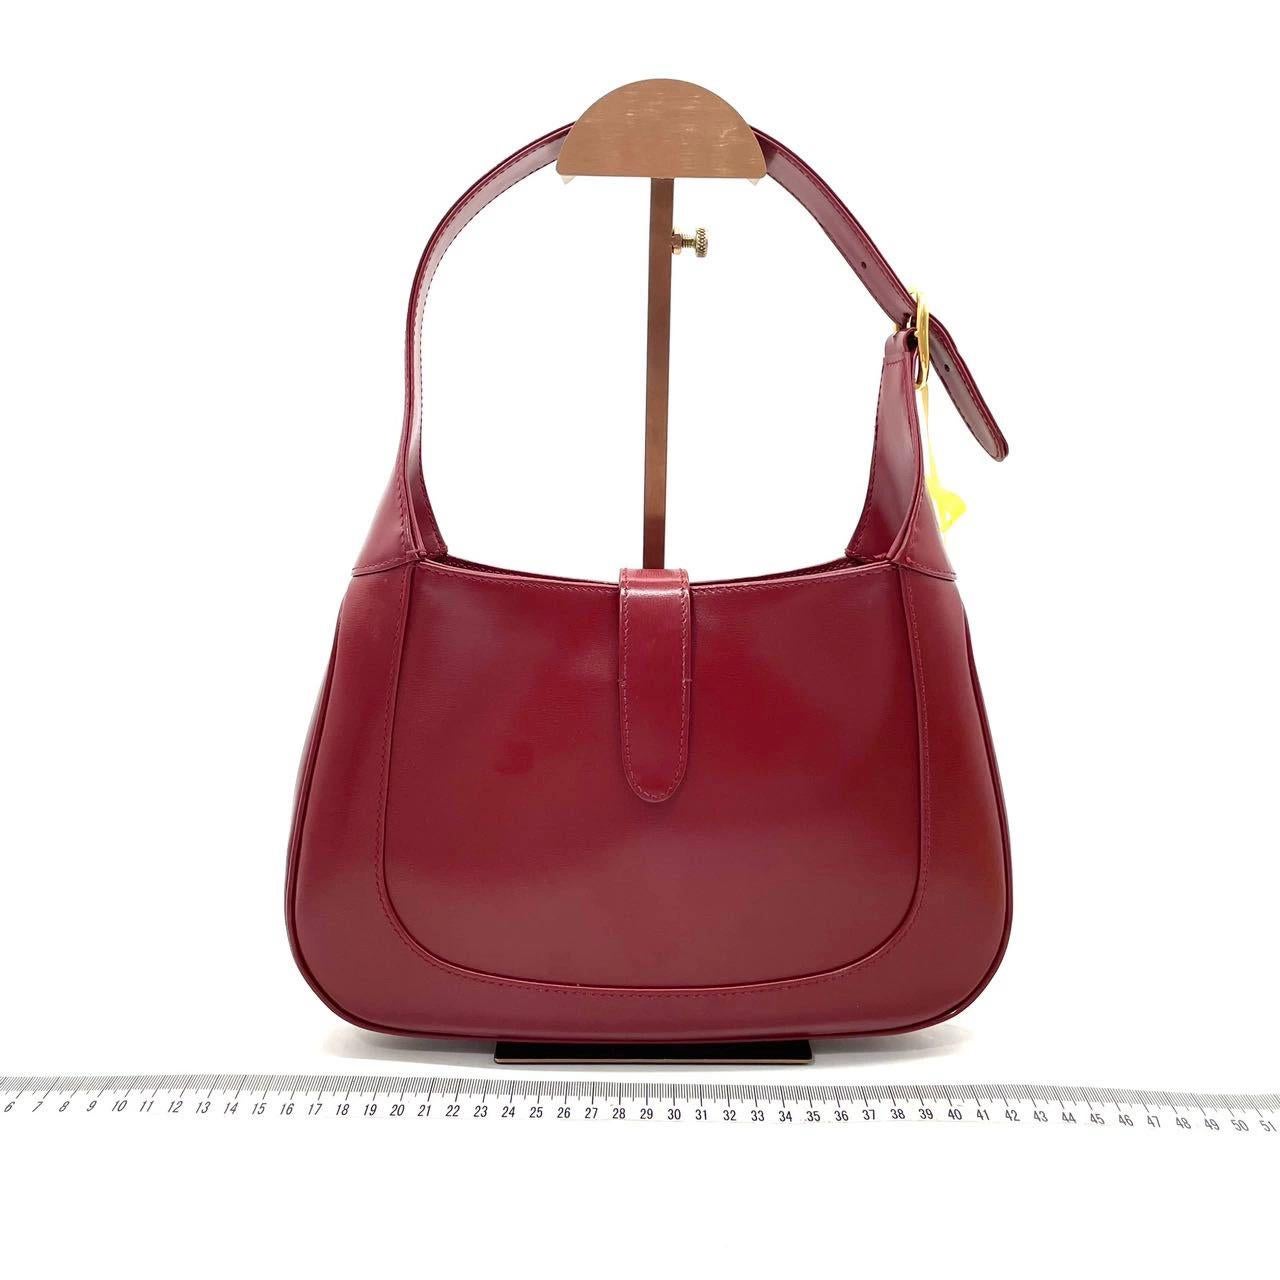 The Gucci Jackie 1961 Red Small bag is a modern take on an iconic design. Crafted in leather with a structured silhouette, it features a crossbody strap so you can bring your essentials wherever life takes you. Its baby blue hue is sure to add a